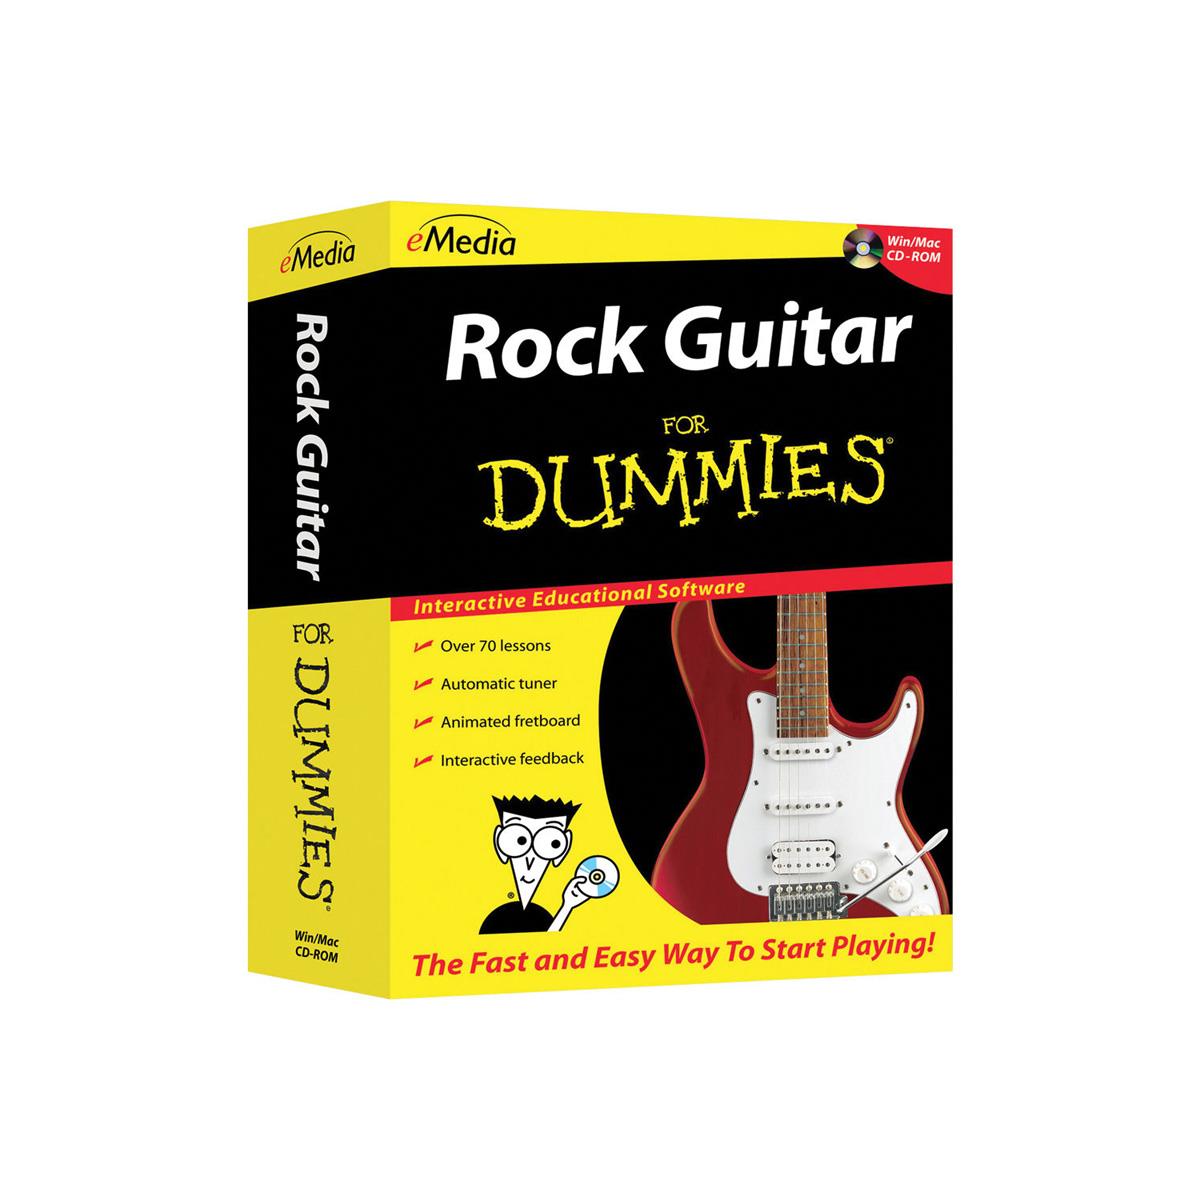 eMedia Rock Guitar For Dummies Software for Windows, Electronic Download -  FD06101DLW